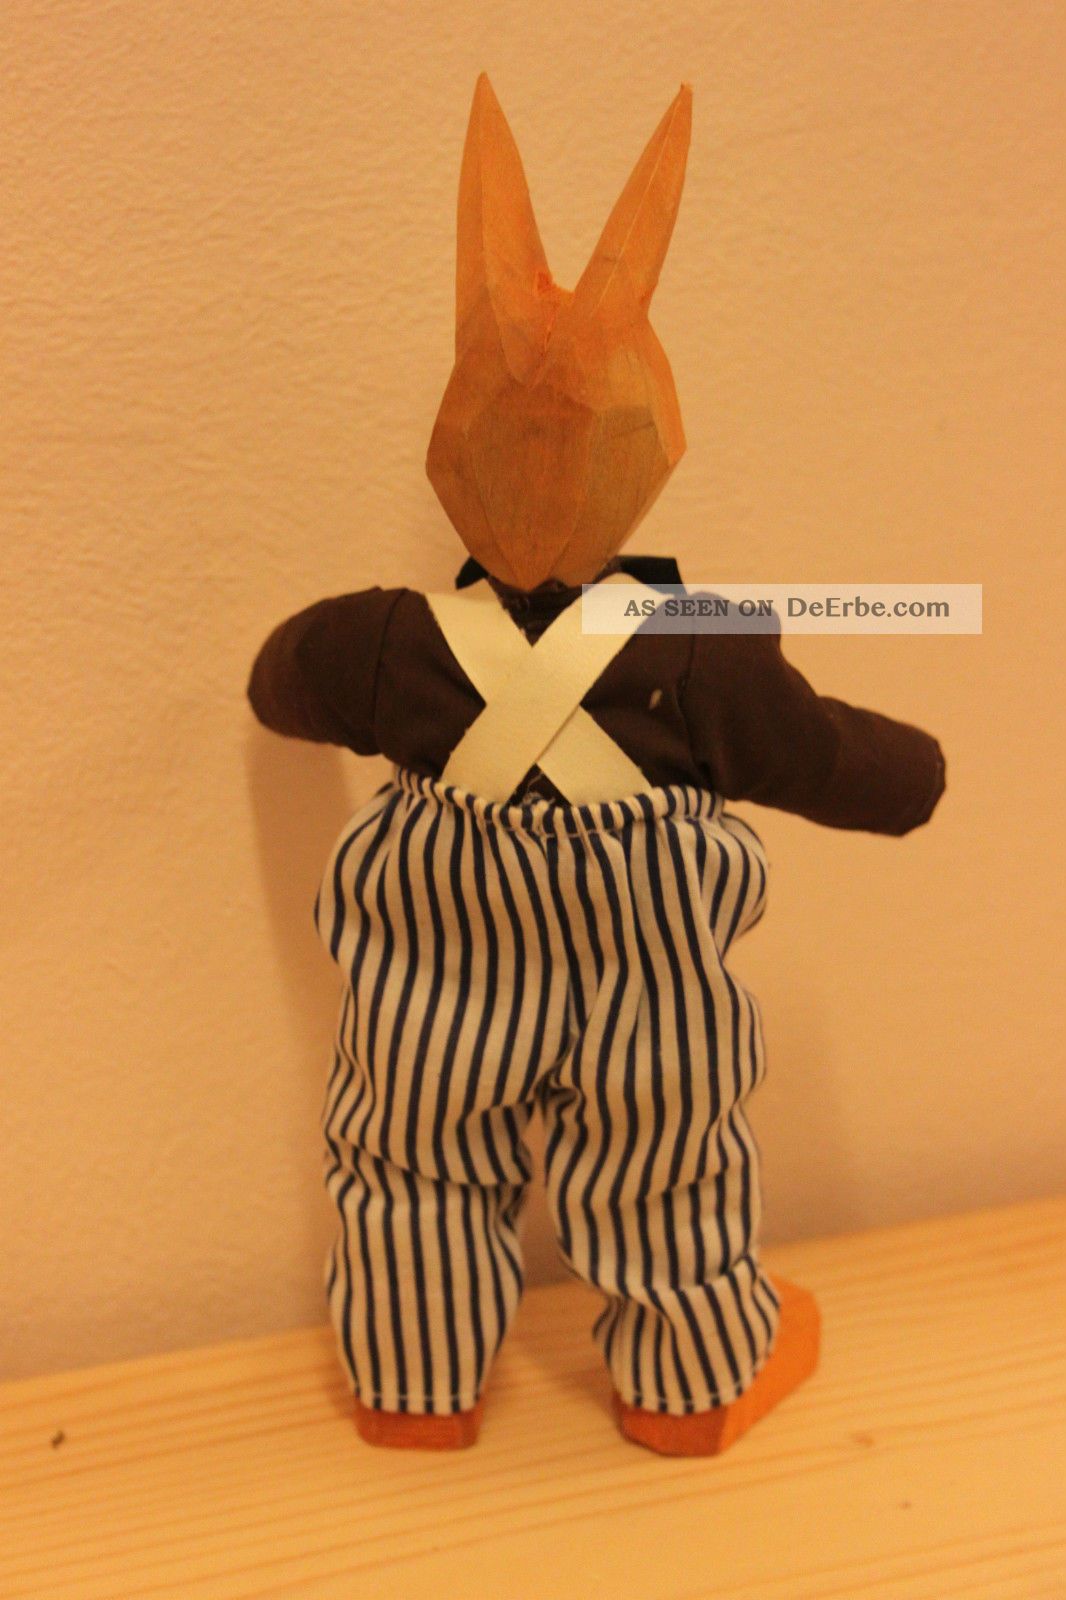 34. Lotte Sievers Hahn: Osterhase Hase 27 Cm Figur Holzpuppe Holz ...